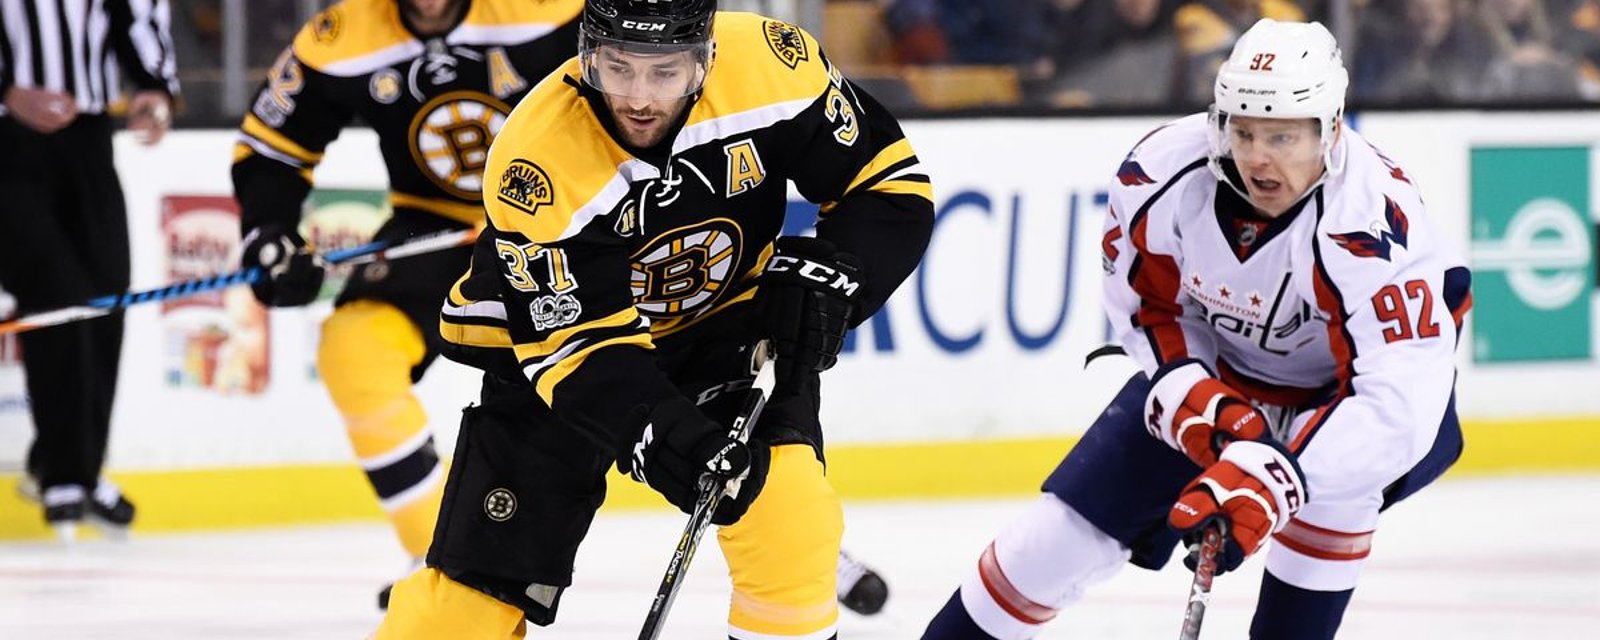 Controversial candidate emerges as Patrice Bergeron’s replacement in Boston!